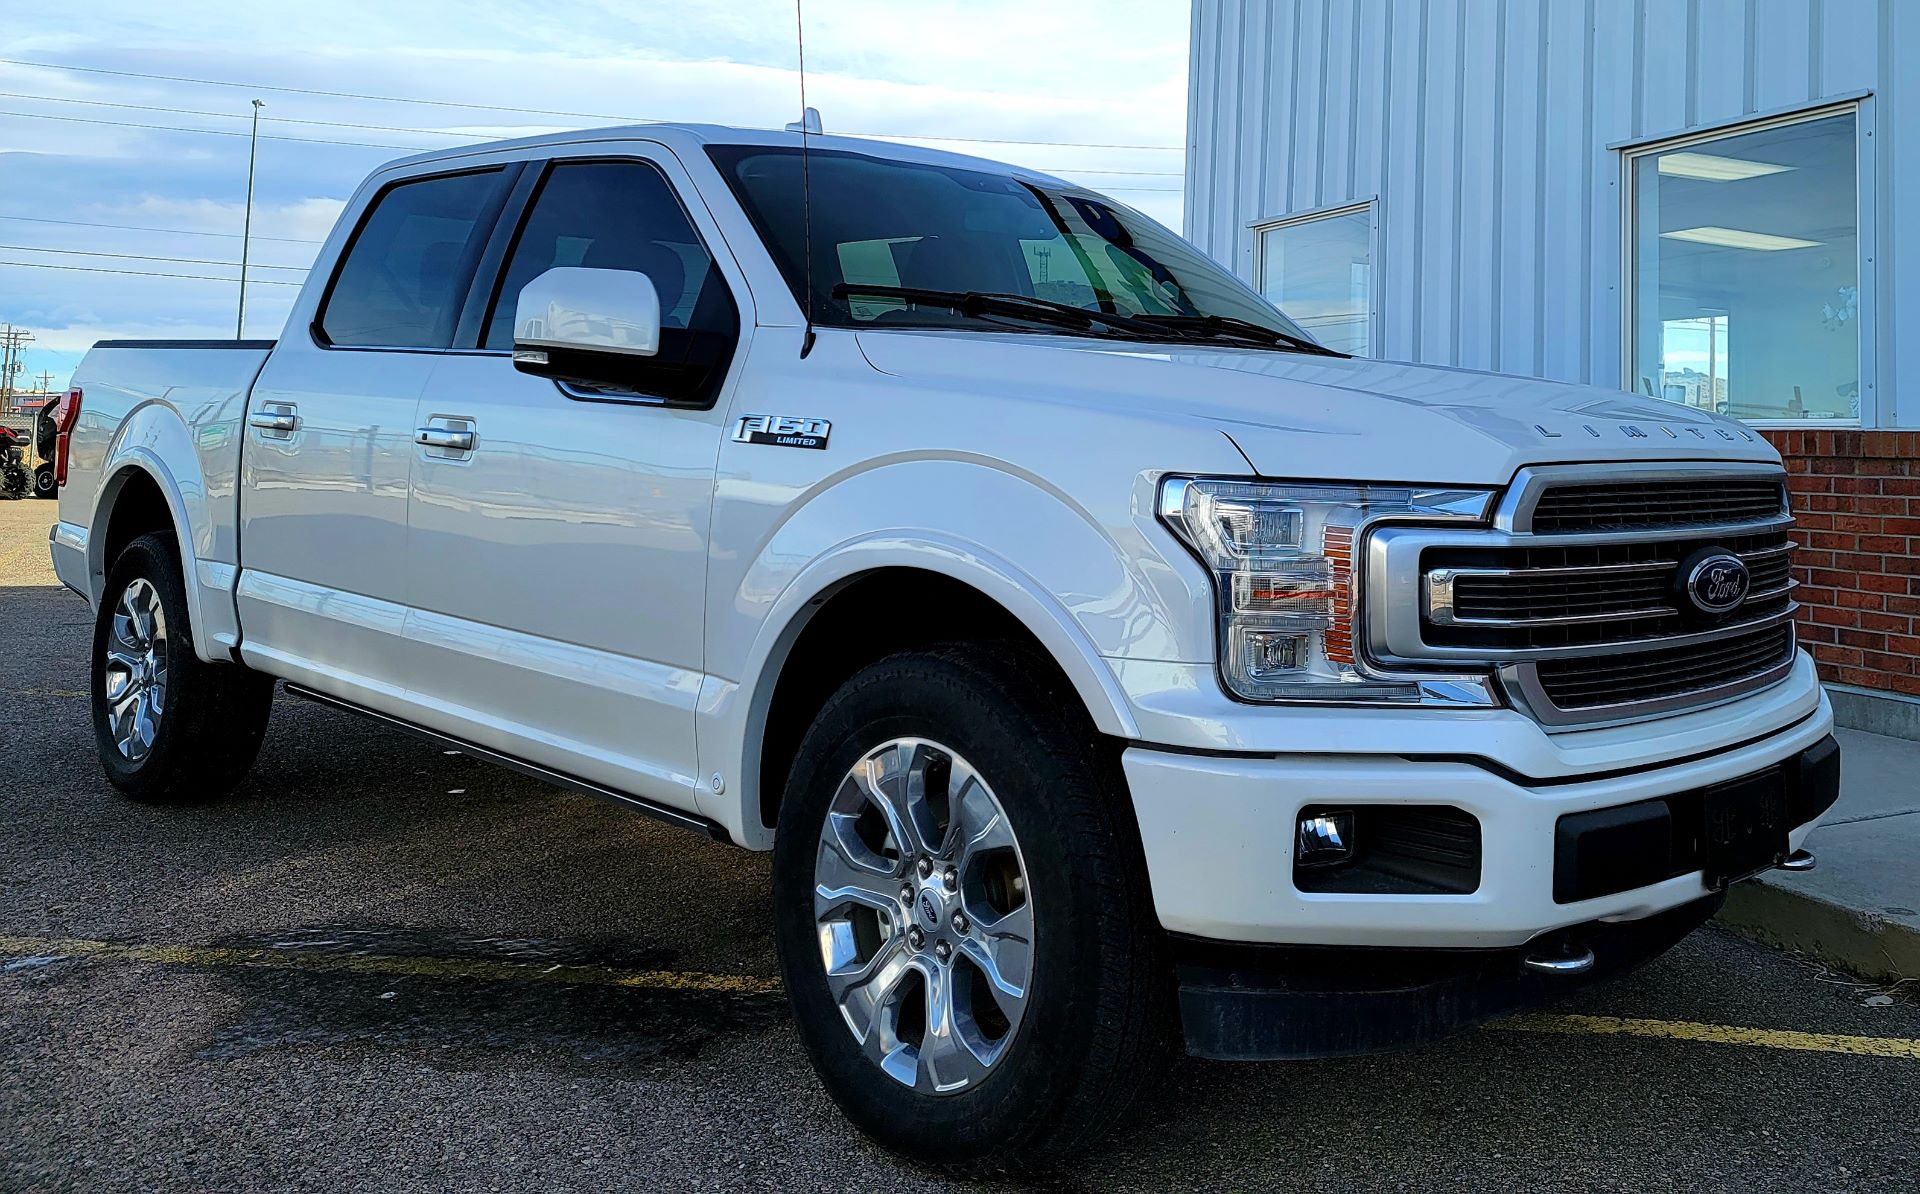 2019 FORD F150 LARIAT in Rock Springs, Wyoming - Photo 2